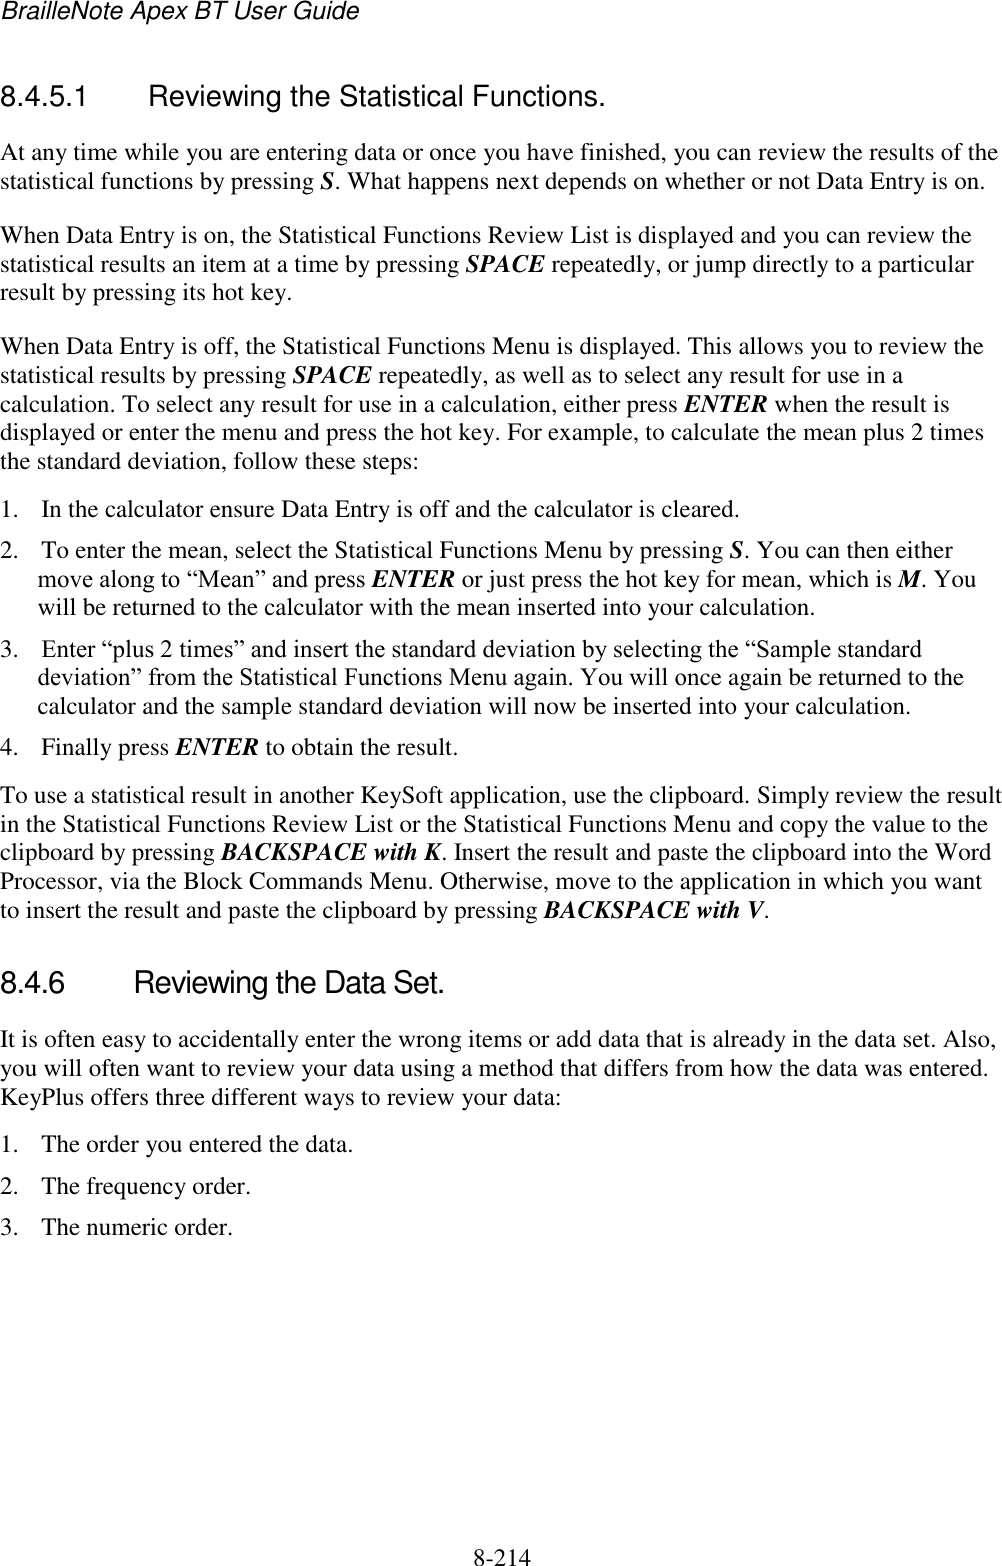 BrailleNote Apex BT User Guide   8-214   8.4.5.1  Reviewing the Statistical Functions. At any time while you are entering data or once you have finished, you can review the results of the statistical functions by pressing S. What happens next depends on whether or not Data Entry is on. When Data Entry is on, the Statistical Functions Review List is displayed and you can review the statistical results an item at a time by pressing SPACE repeatedly, or jump directly to a particular result by pressing its hot key. When Data Entry is off, the Statistical Functions Menu is displayed. This allows you to review the statistical results by pressing SPACE repeatedly, as well as to select any result for use in a calculation. To select any result for use in a calculation, either press ENTER when the result is displayed or enter the menu and press the hot key. For example, to calculate the mean plus 2 times the standard deviation, follow these steps: 1. In the calculator ensure Data Entry is off and the calculator is cleared. 2. To enter the mean, select the Statistical Functions Menu by pressing S. You can then either move along to “Mean” and press ENTER or just press the hot key for mean, which is M. You will be returned to the calculator with the mean inserted into your calculation. 3. Enter “plus 2 times” and insert the standard deviation by selecting the “Sample standard deviation” from the Statistical Functions Menu again. You will once again be returned to the calculator and the sample standard deviation will now be inserted into your calculation. 4. Finally press ENTER to obtain the result. To use a statistical result in another KeySoft application, use the clipboard. Simply review the result in the Statistical Functions Review List or the Statistical Functions Menu and copy the value to the clipboard by pressing BACKSPACE with K. Insert the result and paste the clipboard into the Word Processor, via the Block Commands Menu. Otherwise, move to the application in which you want to insert the result and paste the clipboard by pressing BACKSPACE with V.   8.4.6  Reviewing the Data Set. It is often easy to accidentally enter the wrong items or add data that is already in the data set. Also, you will often want to review your data using a method that differs from how the data was entered. KeyPlus offers three different ways to review your data:  1. The order you entered the data.  2. The frequency order. 3. The numeric order. 